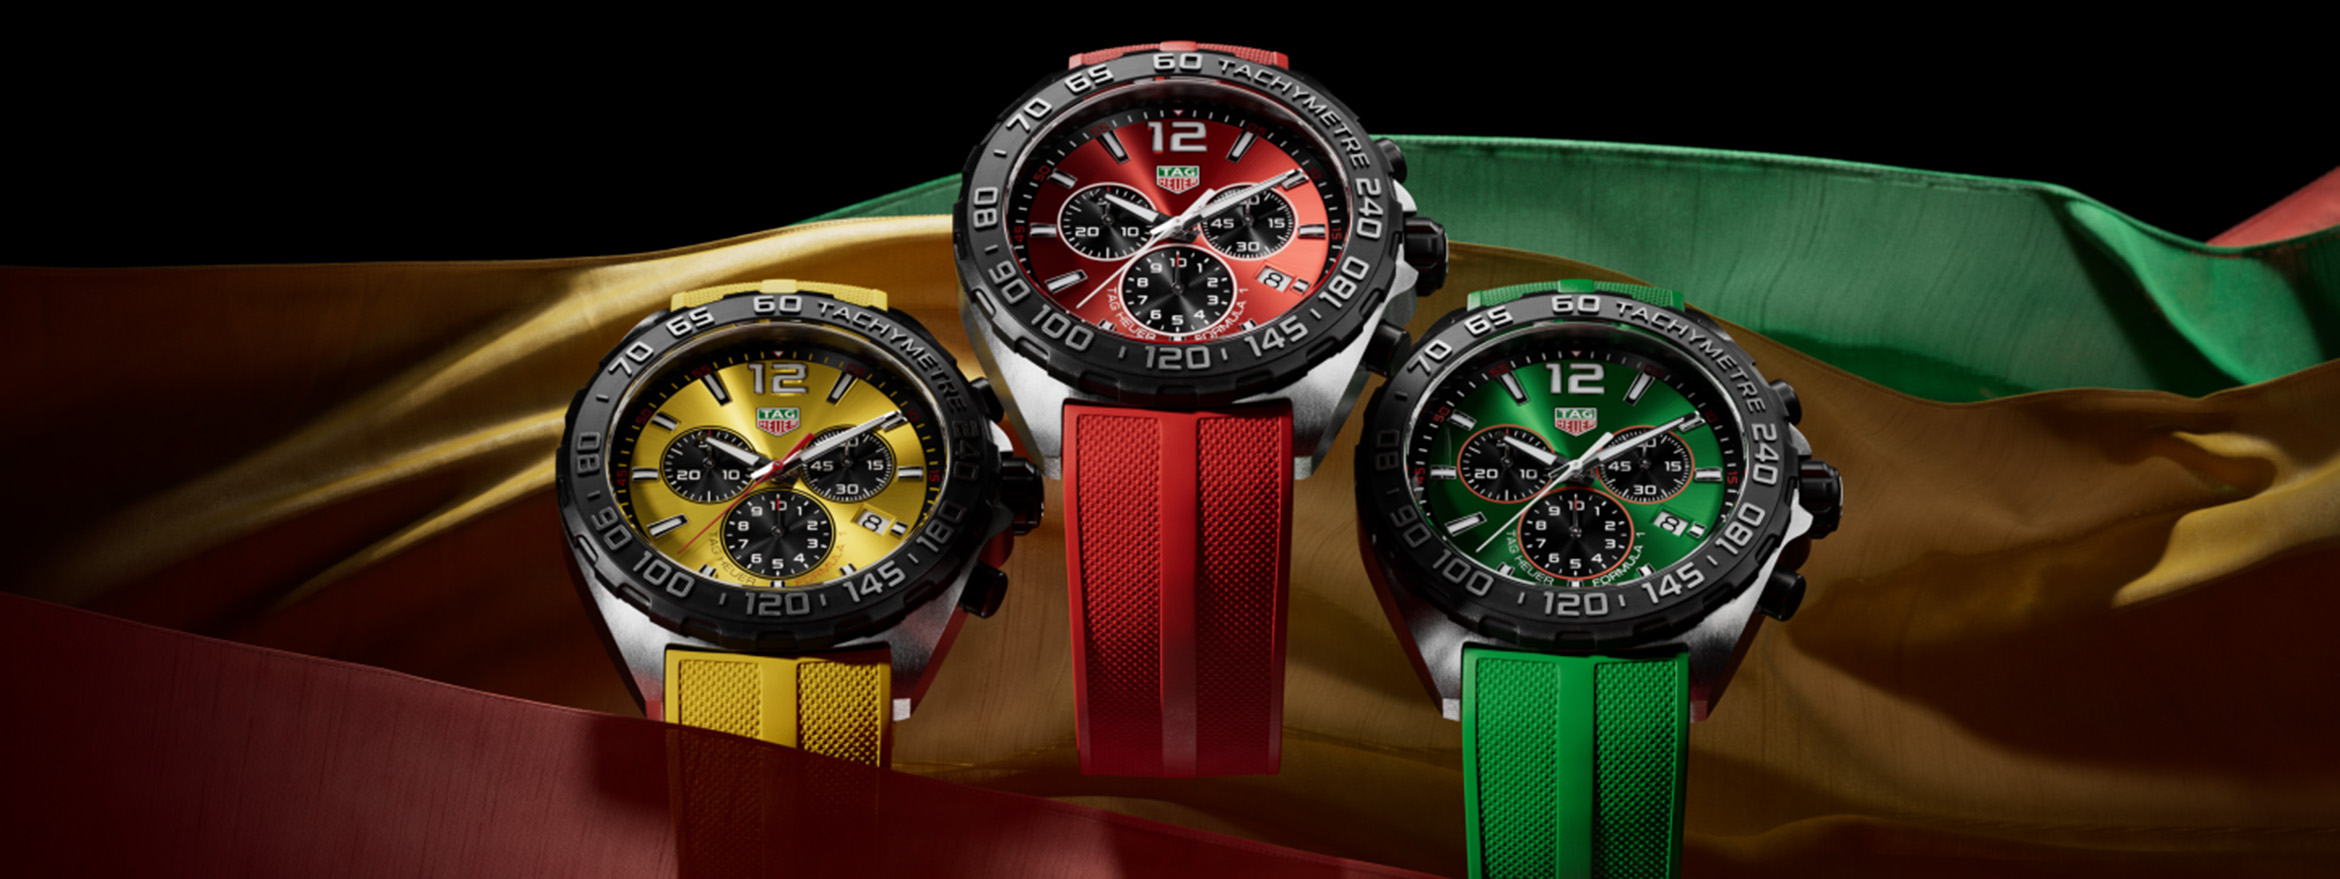 TAG Heuer is reviving an F1-inspired classic for its watch range this year